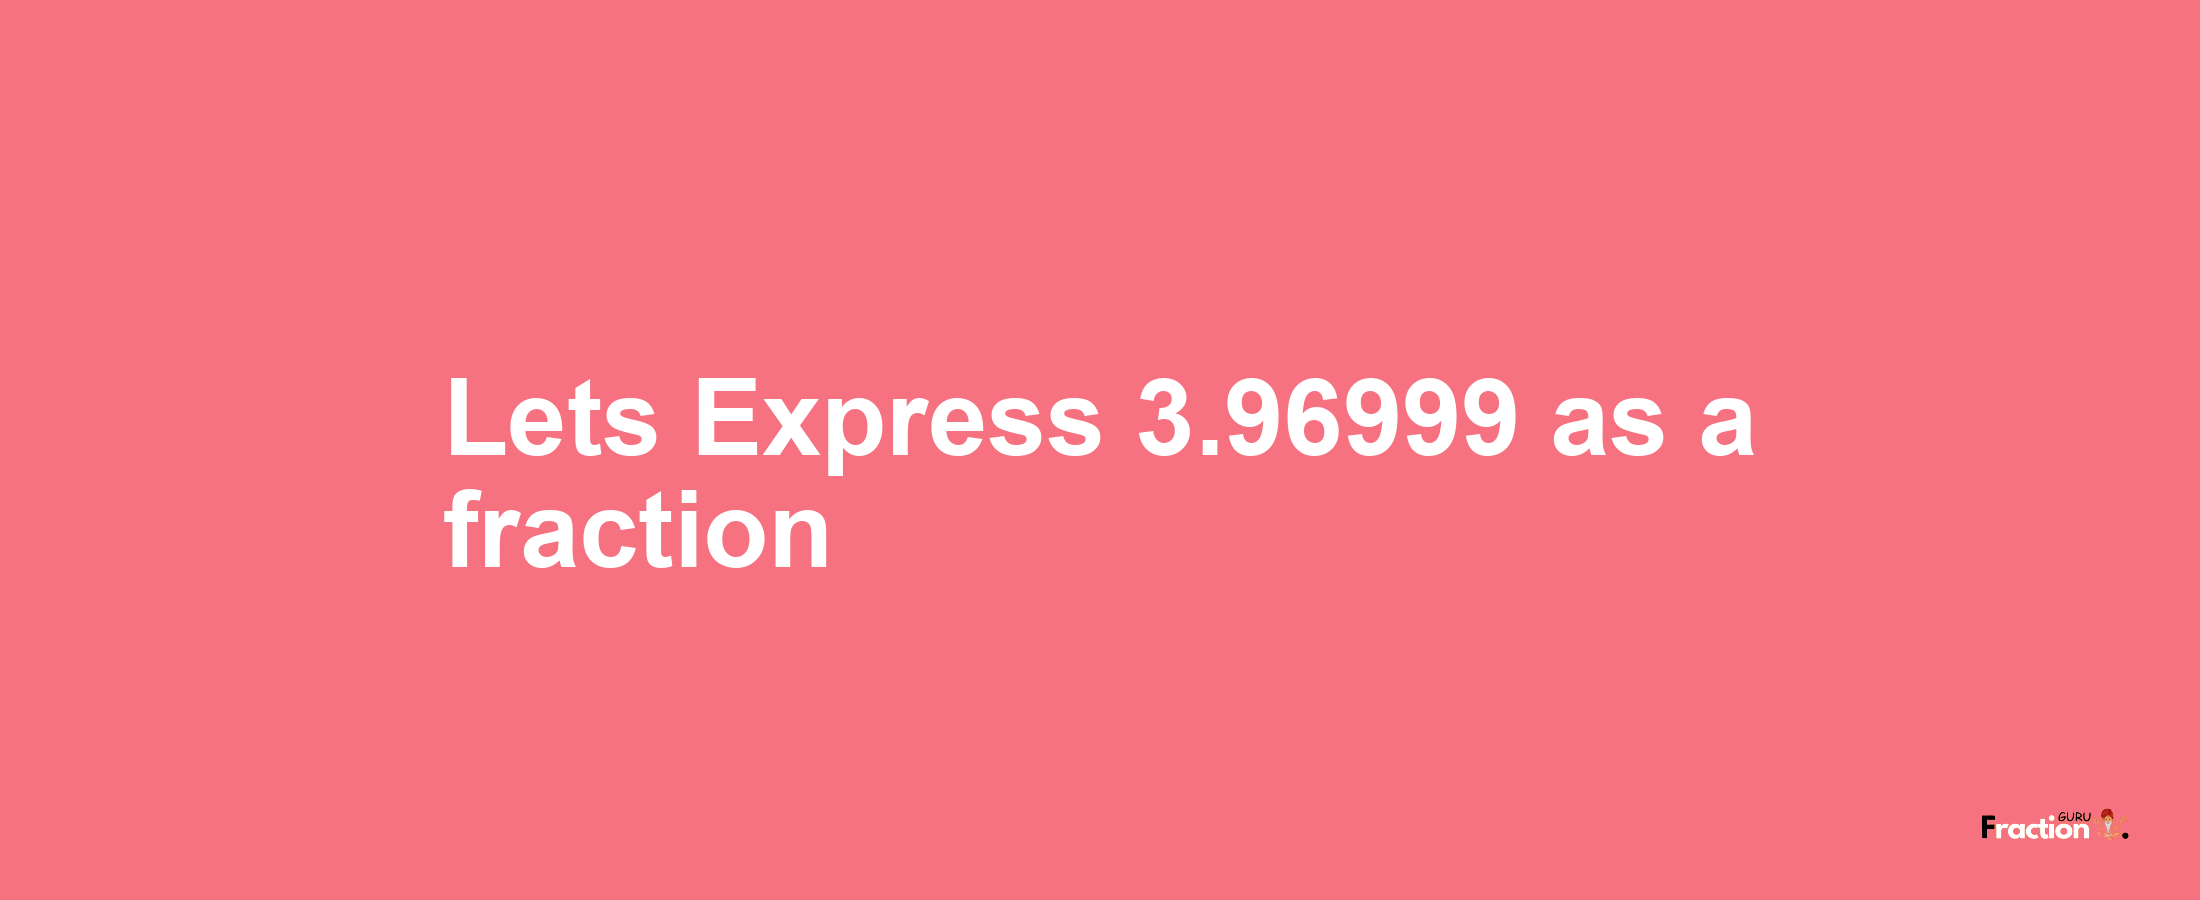 Lets Express 3.96999 as afraction